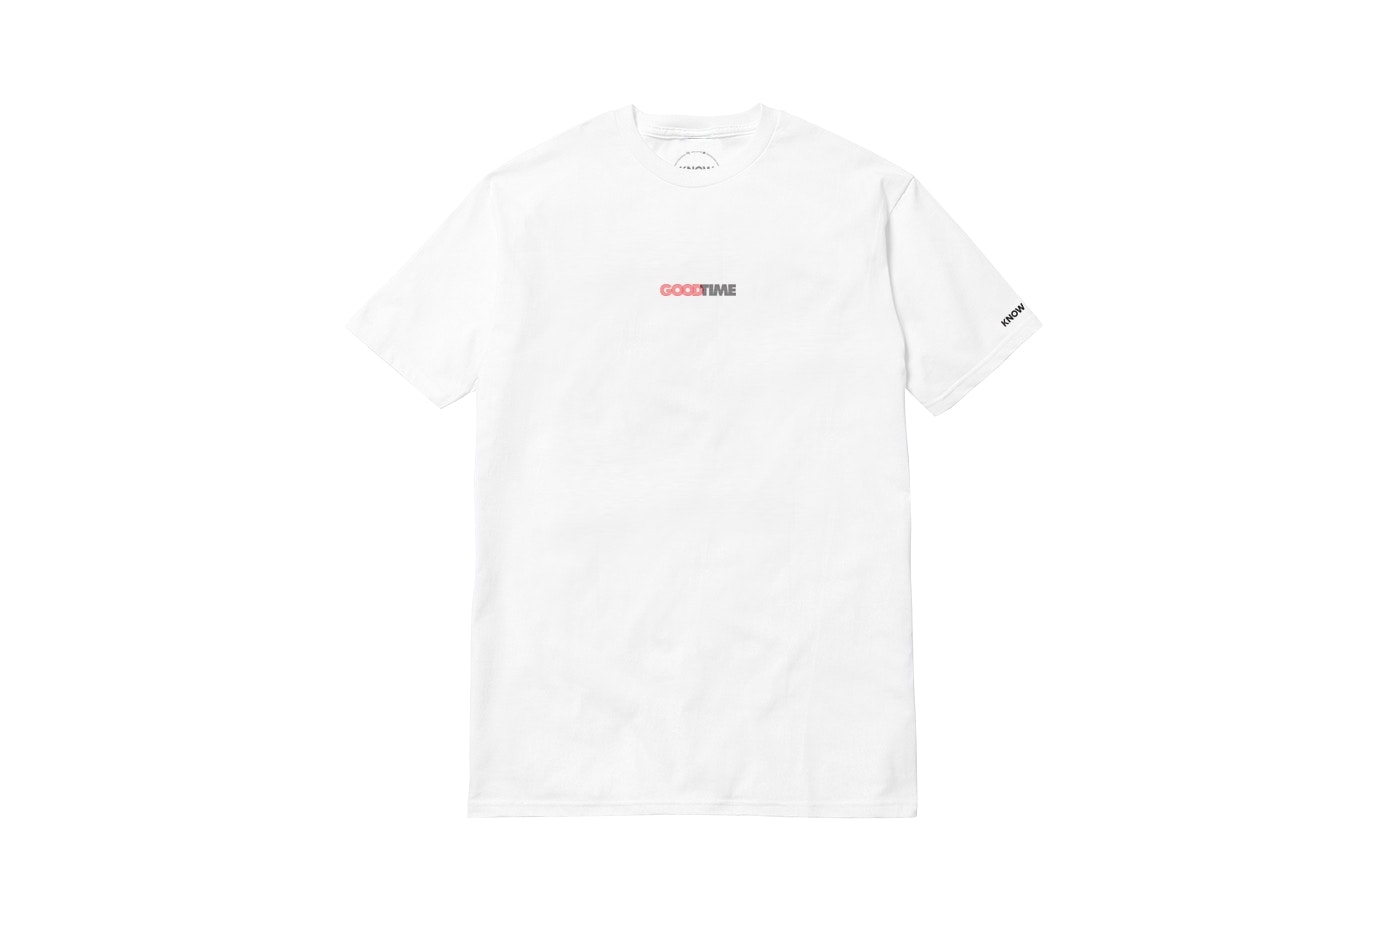 Good Time Know Wave T-shirt Capsule